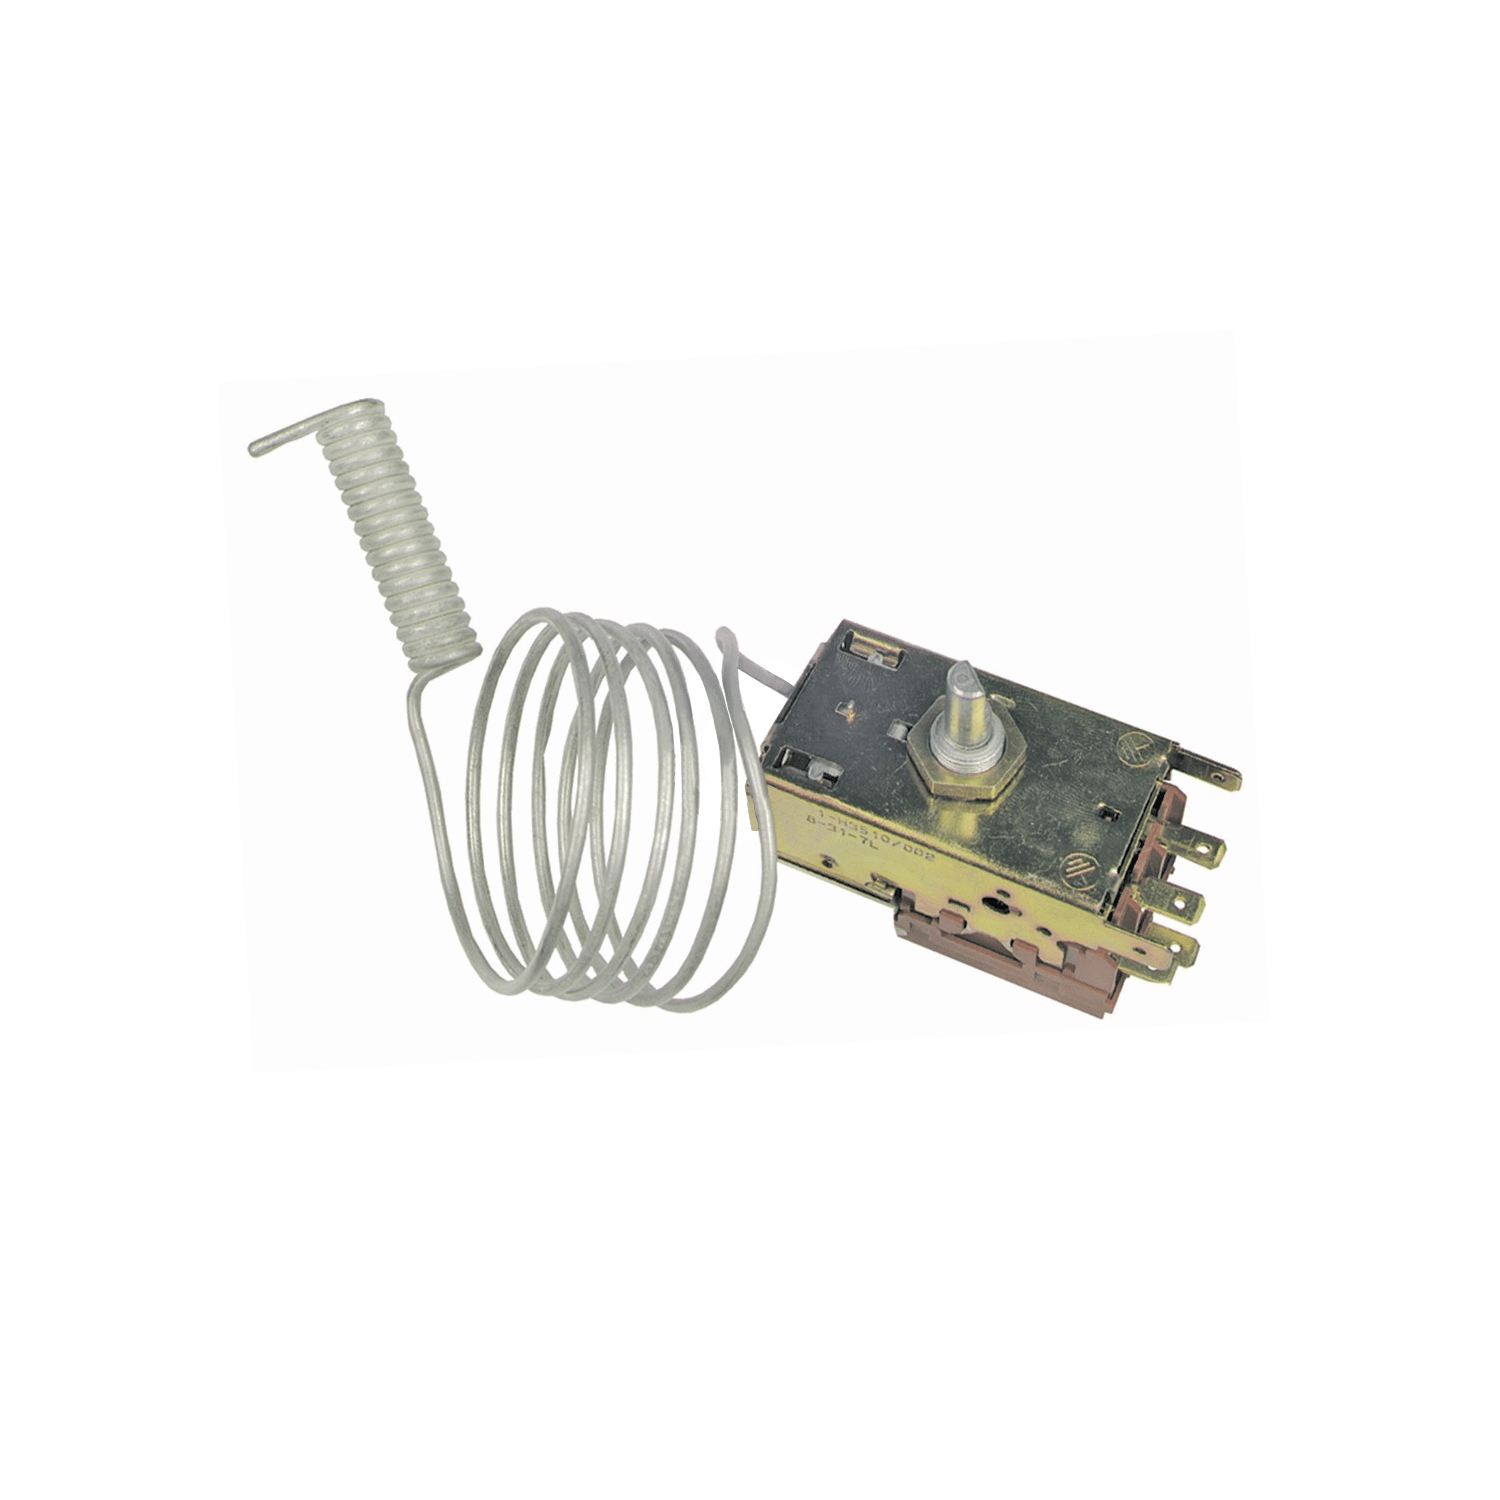 Thermostat Ranco K61-H3510 Tube capillaire AMP 1500mm / 920mm 3x4,8mm